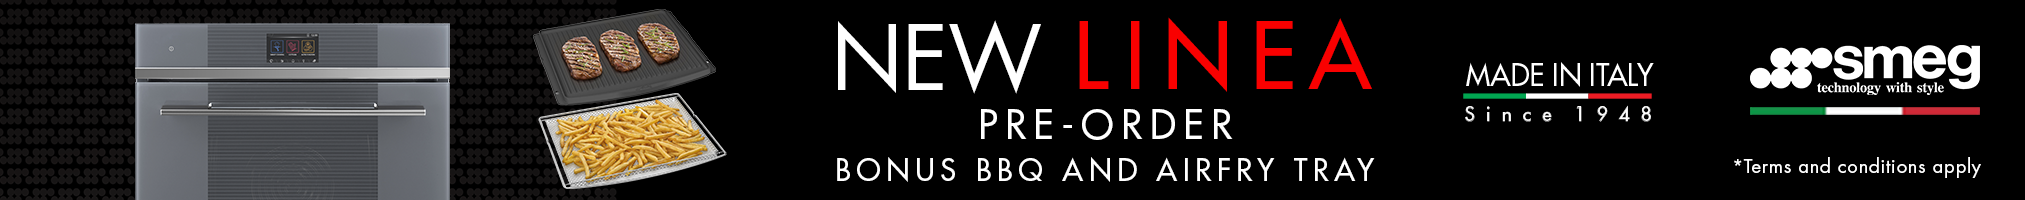 Pre-order An Eligible Linea & Receive Bonus BBQ Tray & Airfry Tray Valued At $598